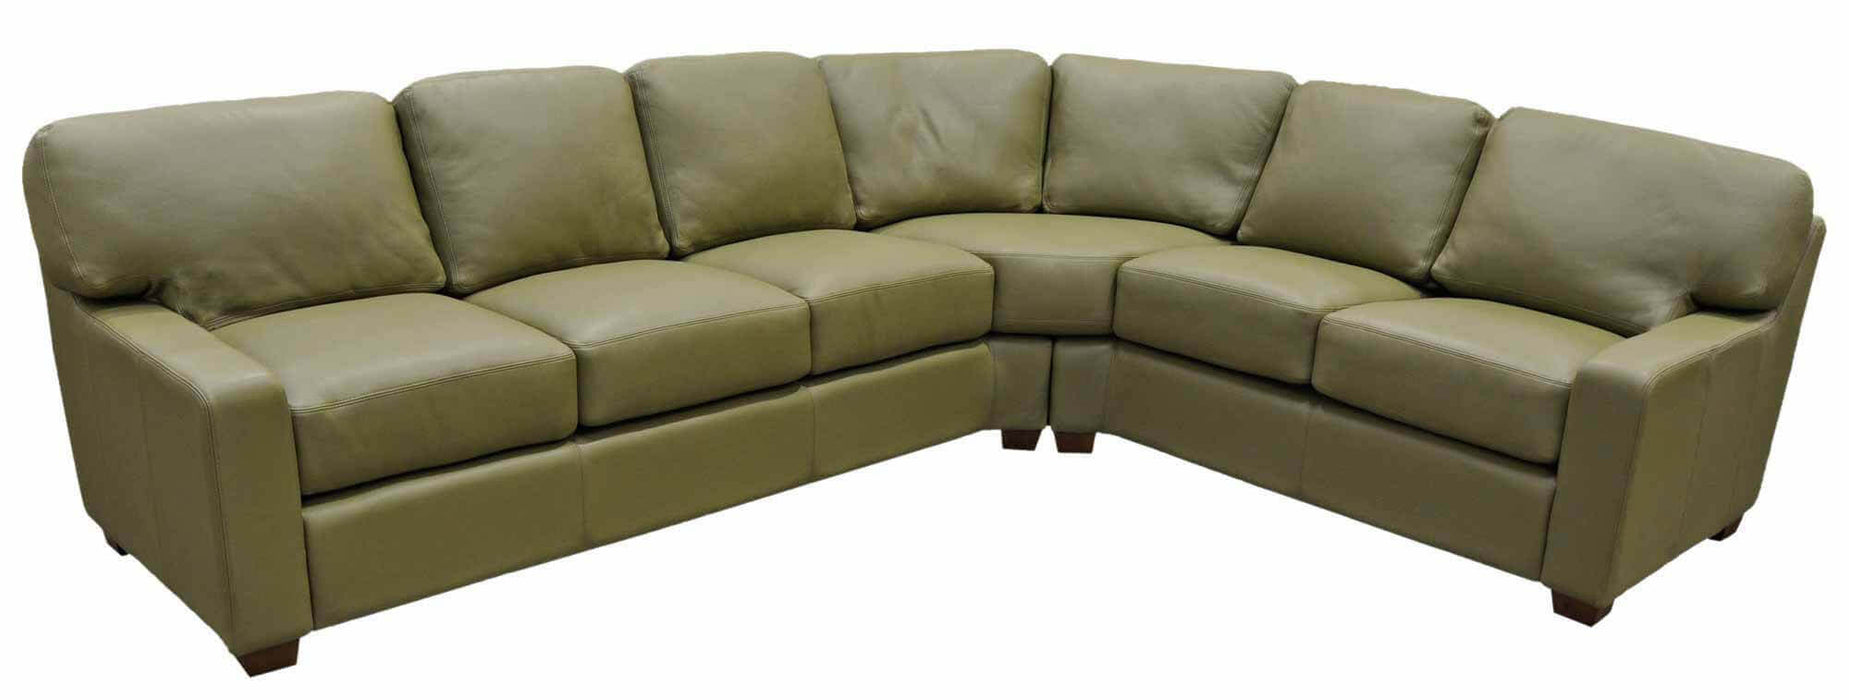 Albany Leather Sectional | American Style | Wellington's Fine Leather Furniture